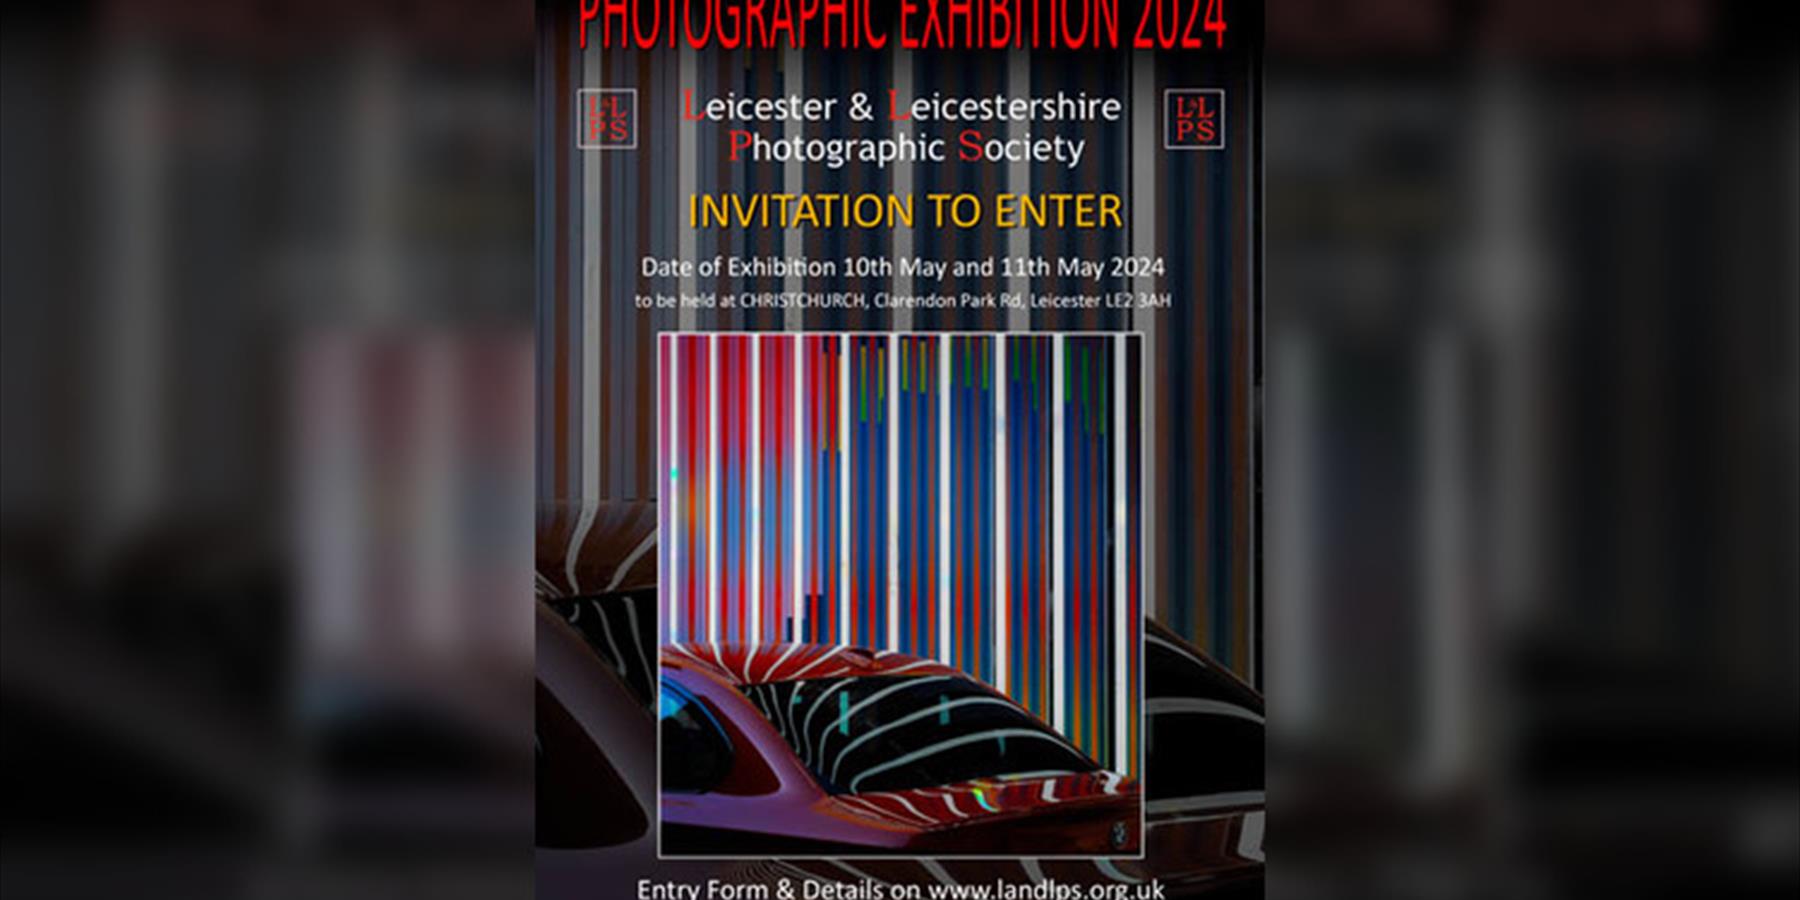 Llps Photography Exhibition